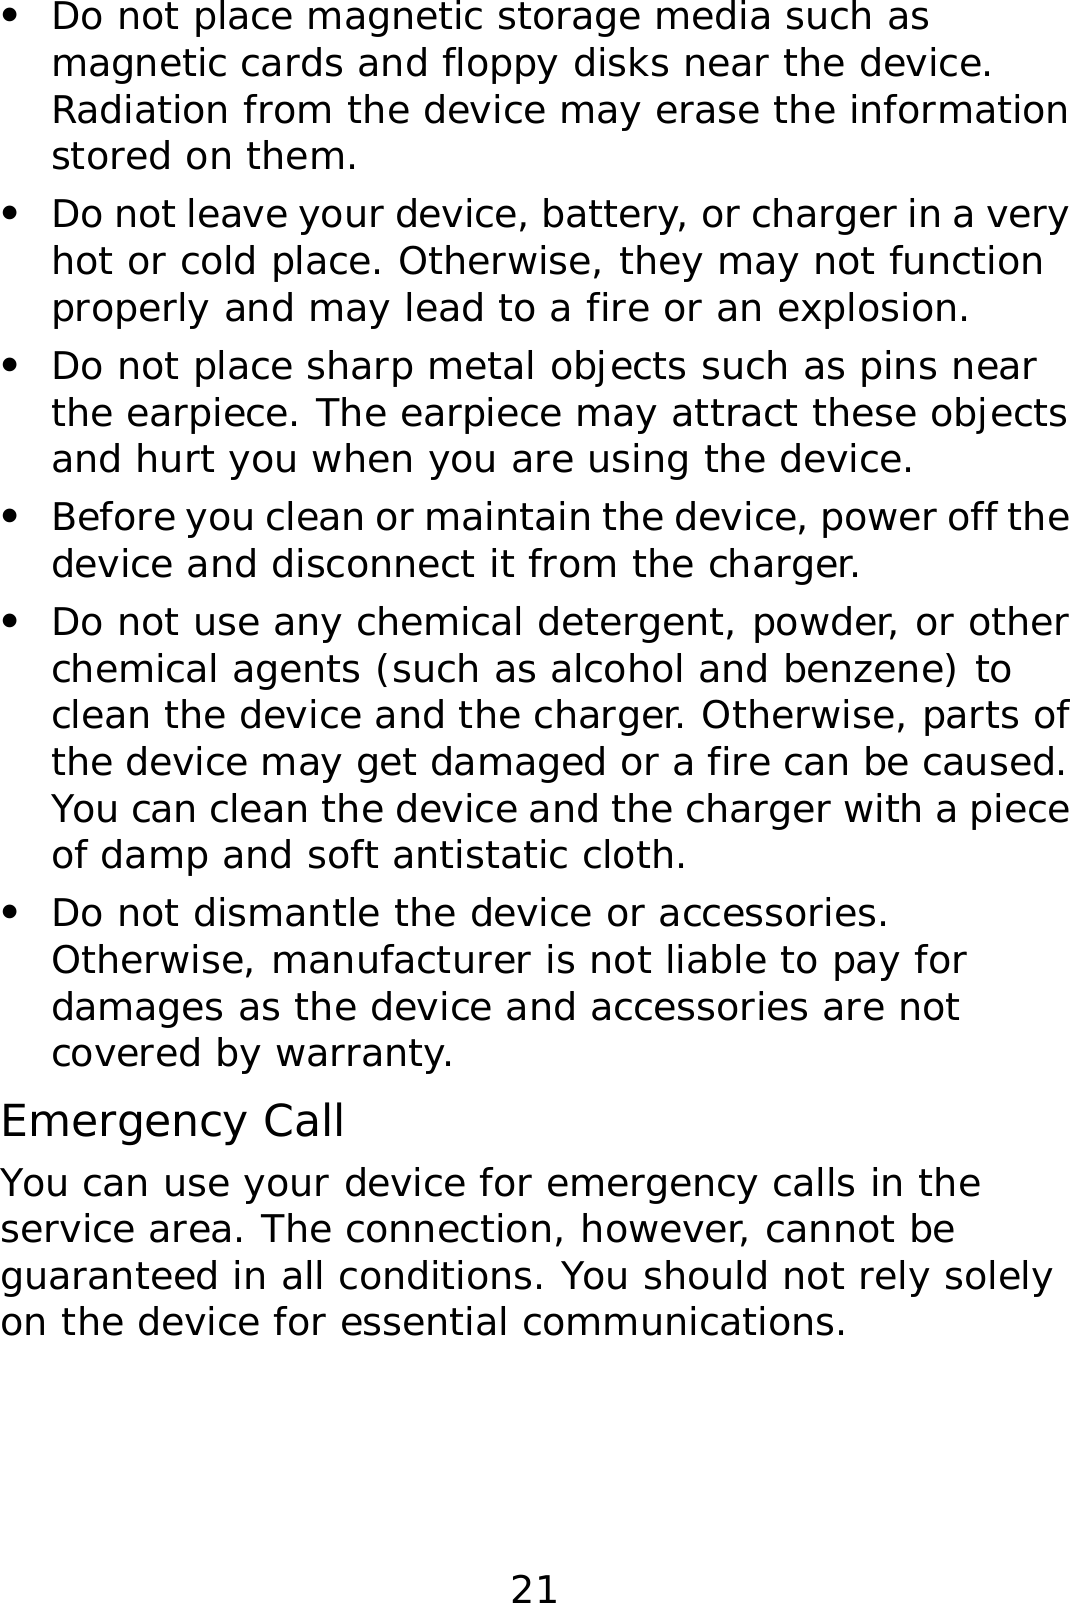 21 z Do not place magnetic storage media such as magnetic cards and floppy disks near the device. Radiation from the device may erase the information stored on them. z Do not leave your device, battery, or charger in a very hot or cold place. Otherwise, they may not function properly and may lead to a fire or an explosion. z Do not place sharp metal objects such as pins near the earpiece. The earpiece may attract these objects and hurt you when you are using the device. z Before you clean or maintain the device, power off the device and disconnect it from the charger.  z Do not use any chemical detergent, powder, or other chemical agents (such as alcohol and benzene) to clean the device and the charger. Otherwise, parts of the device may get damaged or a fire can be caused. You can clean the device and the charger with a piece of damp and soft antistatic cloth. z Do not dismantle the device or accessories. Otherwise, manufacturer is not liable to pay for damages as the device and accessories are not covered by warranty. Emergency Call You can use your device for emergency calls in the service area. The connection, however, cannot be guaranteed in all conditions. You should not rely solely on the device for essential communications. 